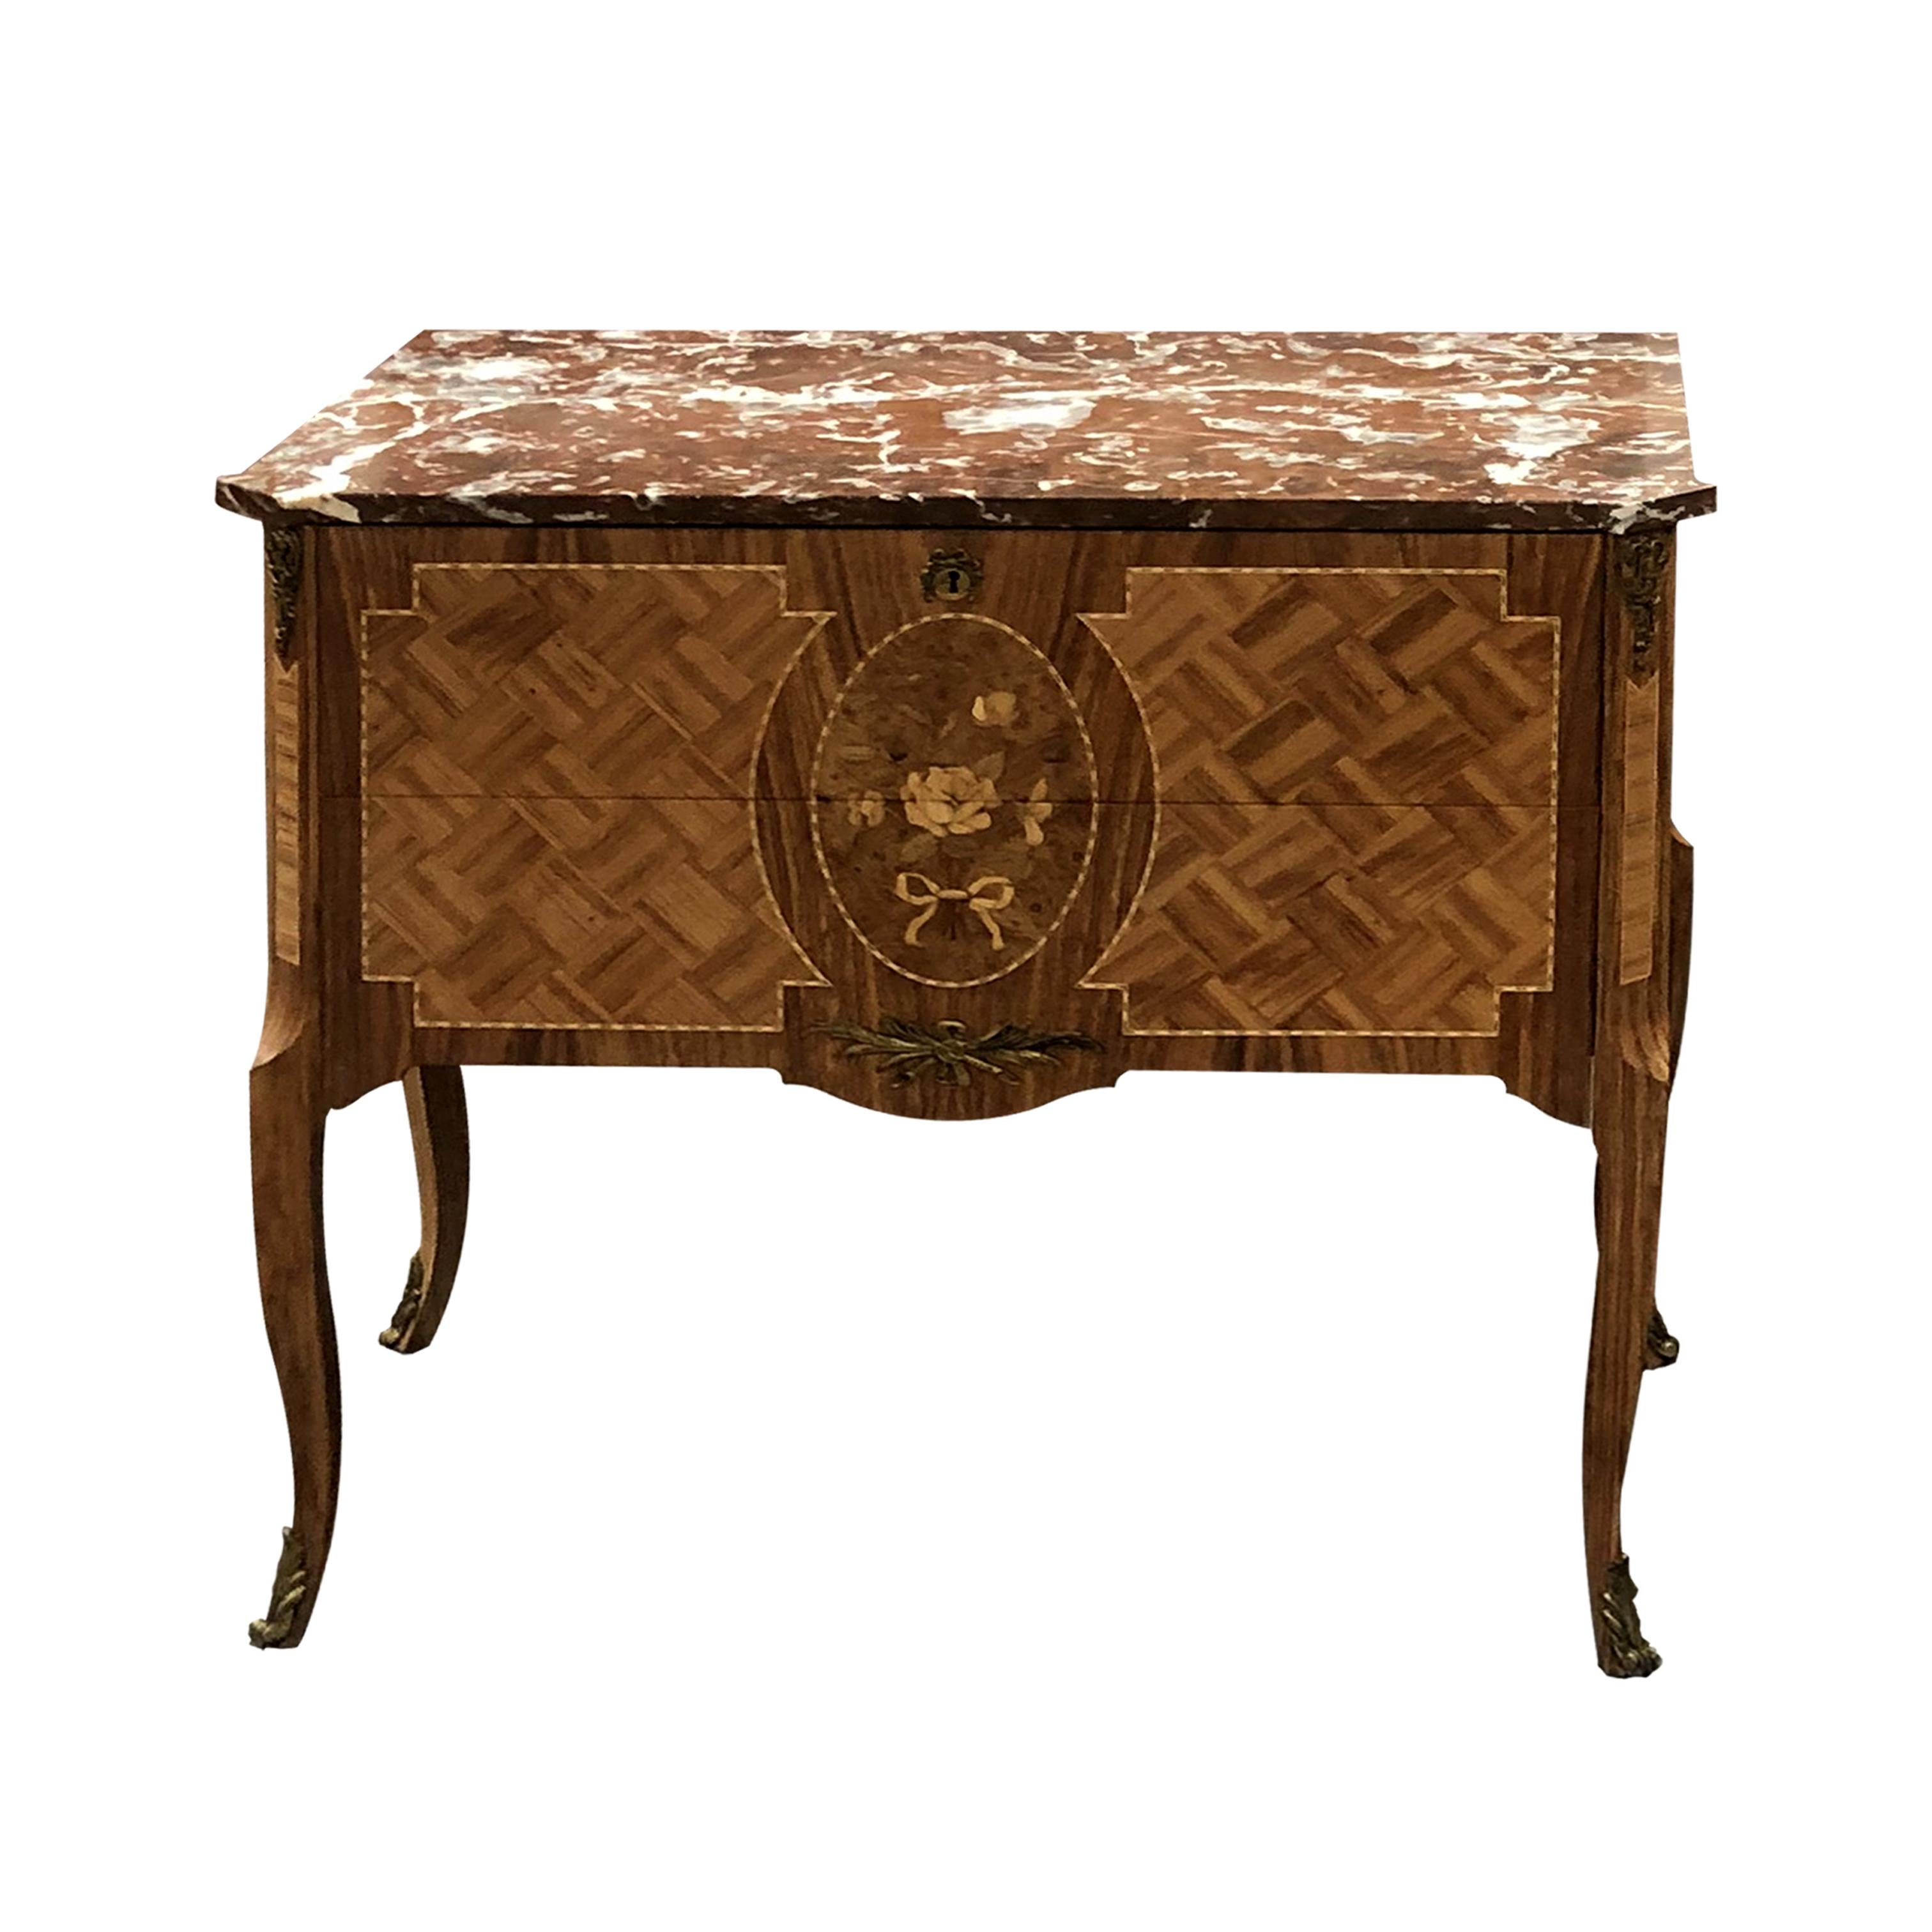 A pair of early 20th century Swedish marquetry chest of drawers or bedside tables with their original marble tops, gilt mounts and escutcheons. The chests of drawers are made of many different woods. One of the chests has a darker marquetry surround